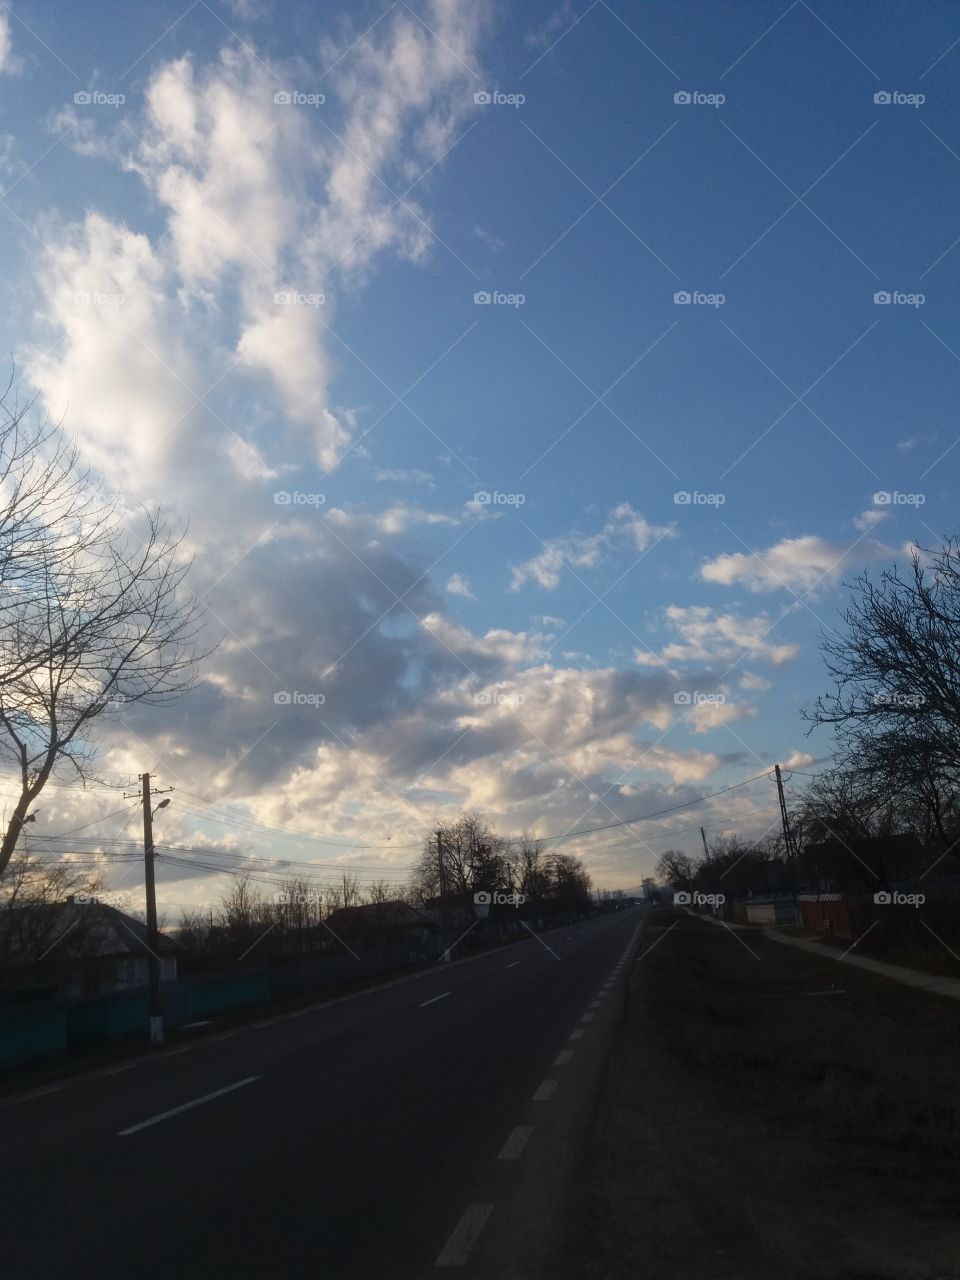 Landscape of a road with beautiful sky